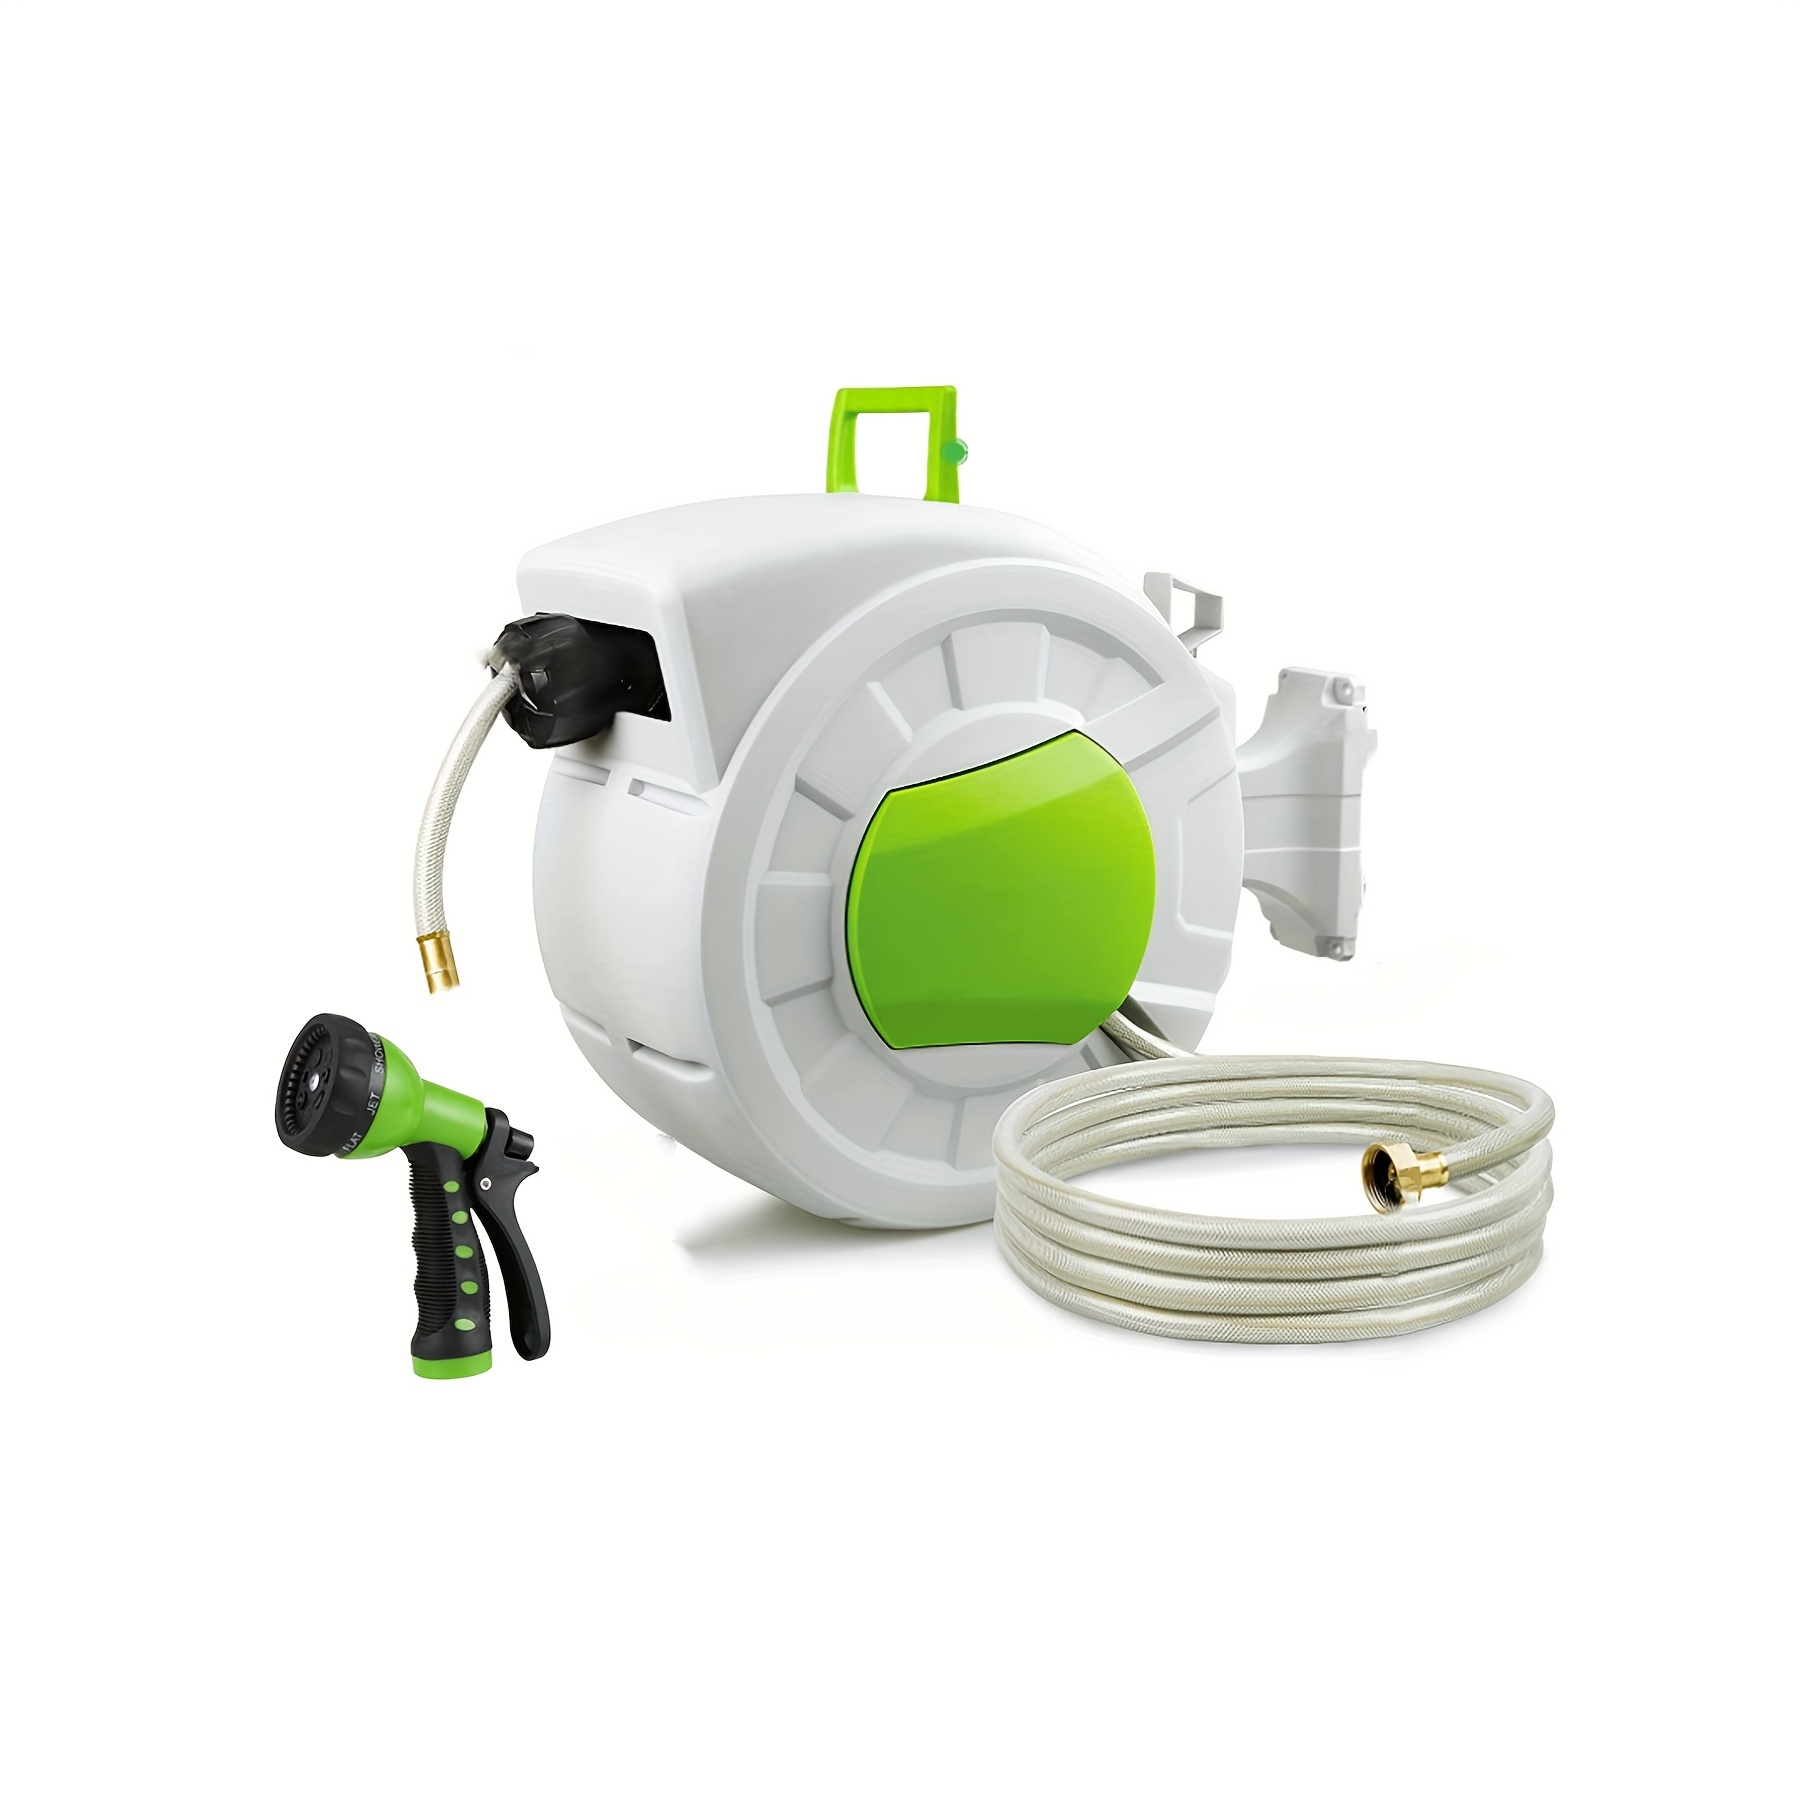 Retractable Water Hose Reel with 7 Sprayer Modes, Wall Mount, 180 Degrees  Swivel Bracket Slow Return Systemfor Garden Watering Outdoor 10m Hose